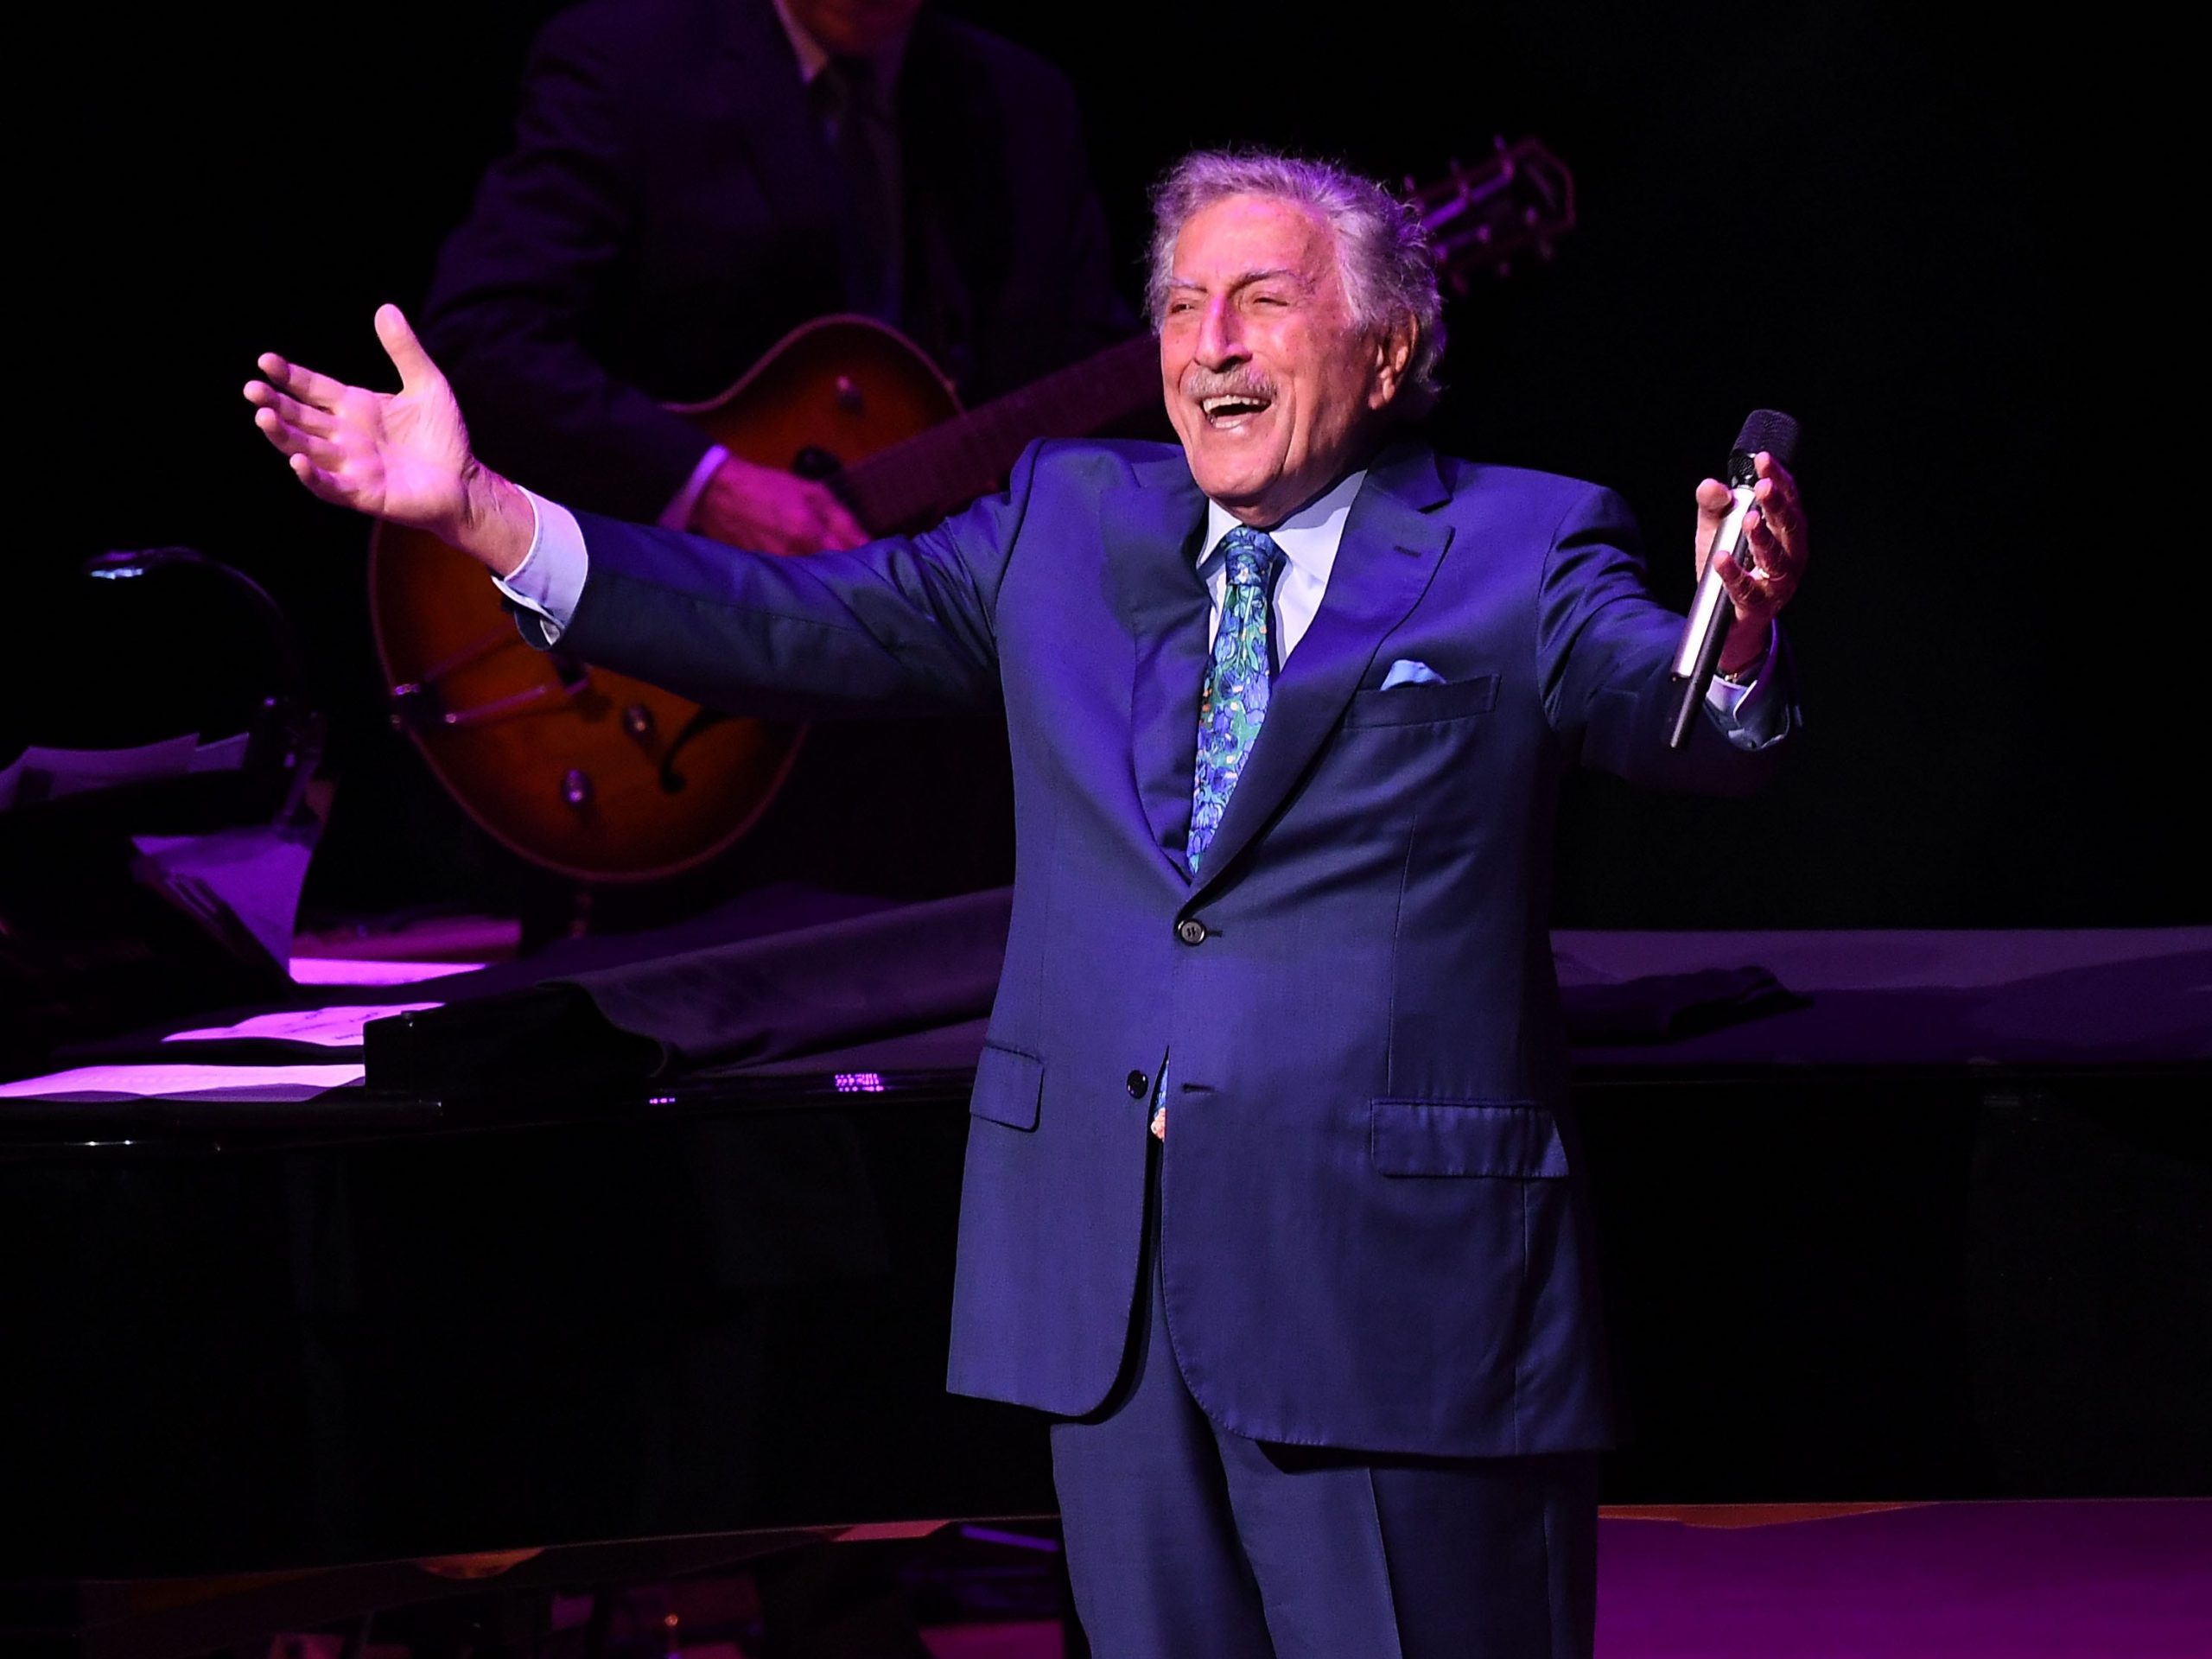 Tony Bennett 'doesn't know' about his Alzheimer's diagnosis, according ...